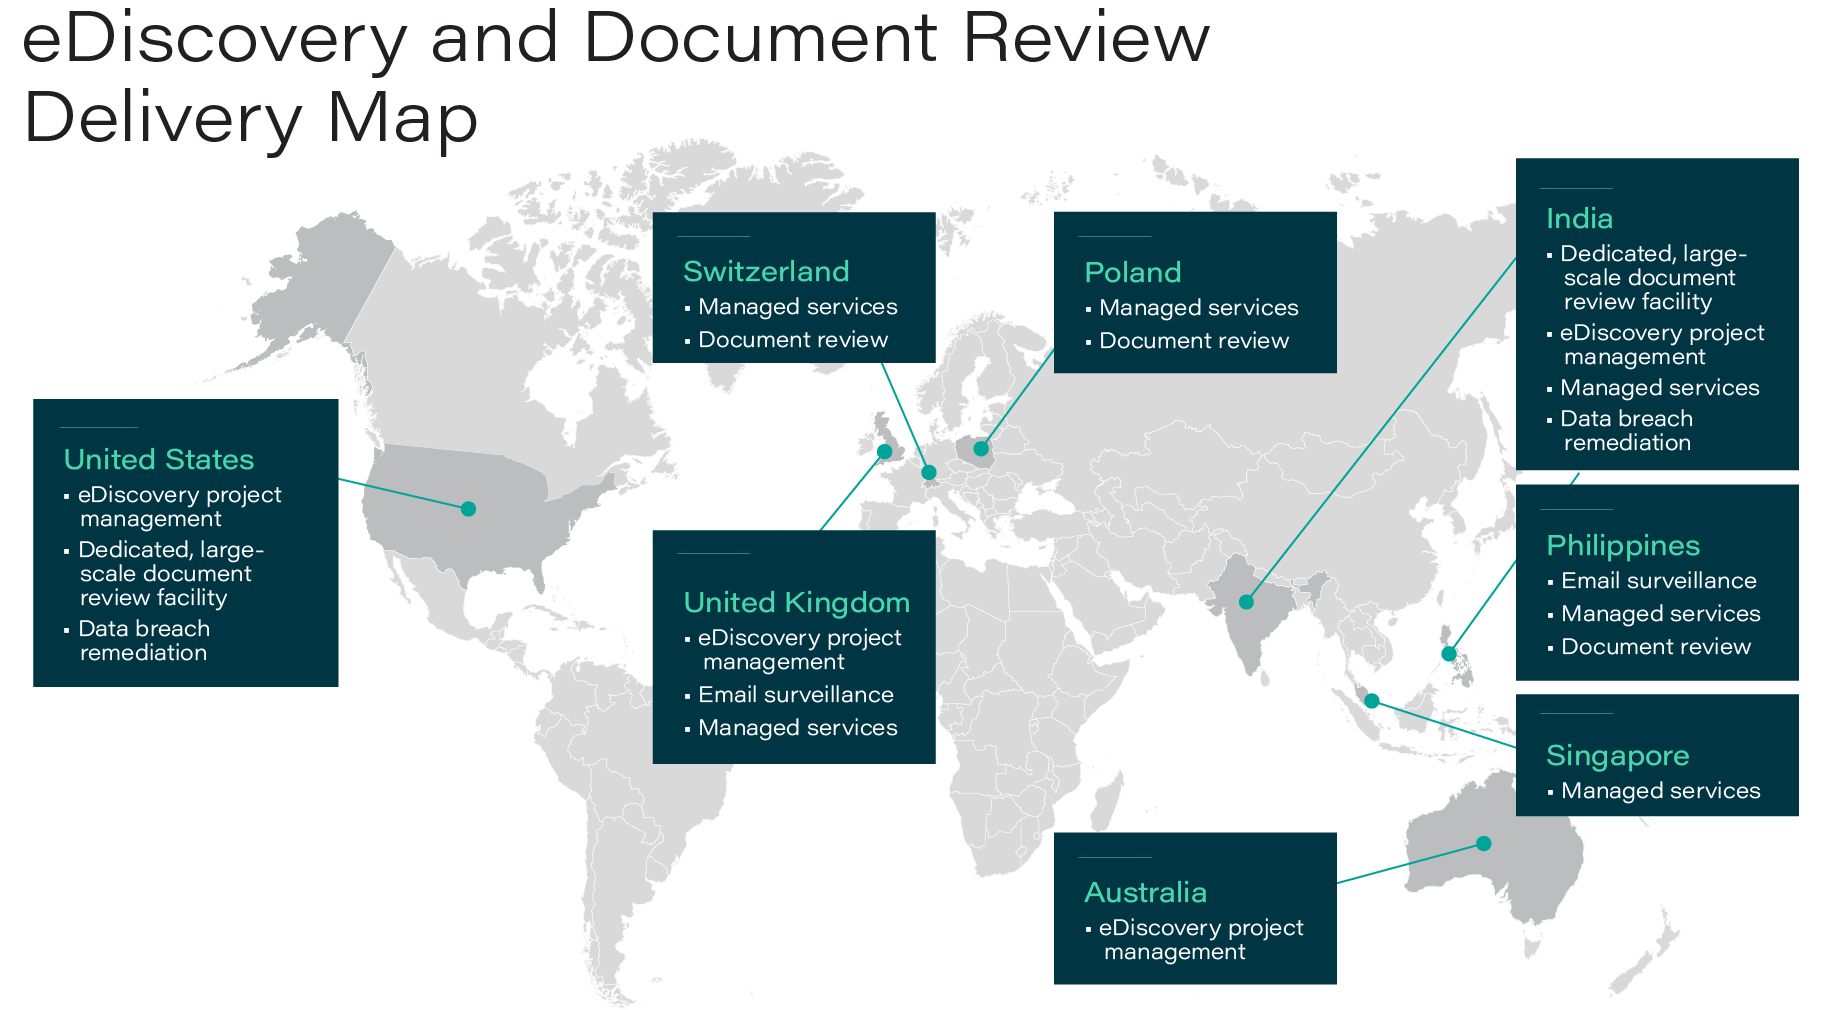 Design Slide on eDiscovery and Document Review Delivery Roadmap